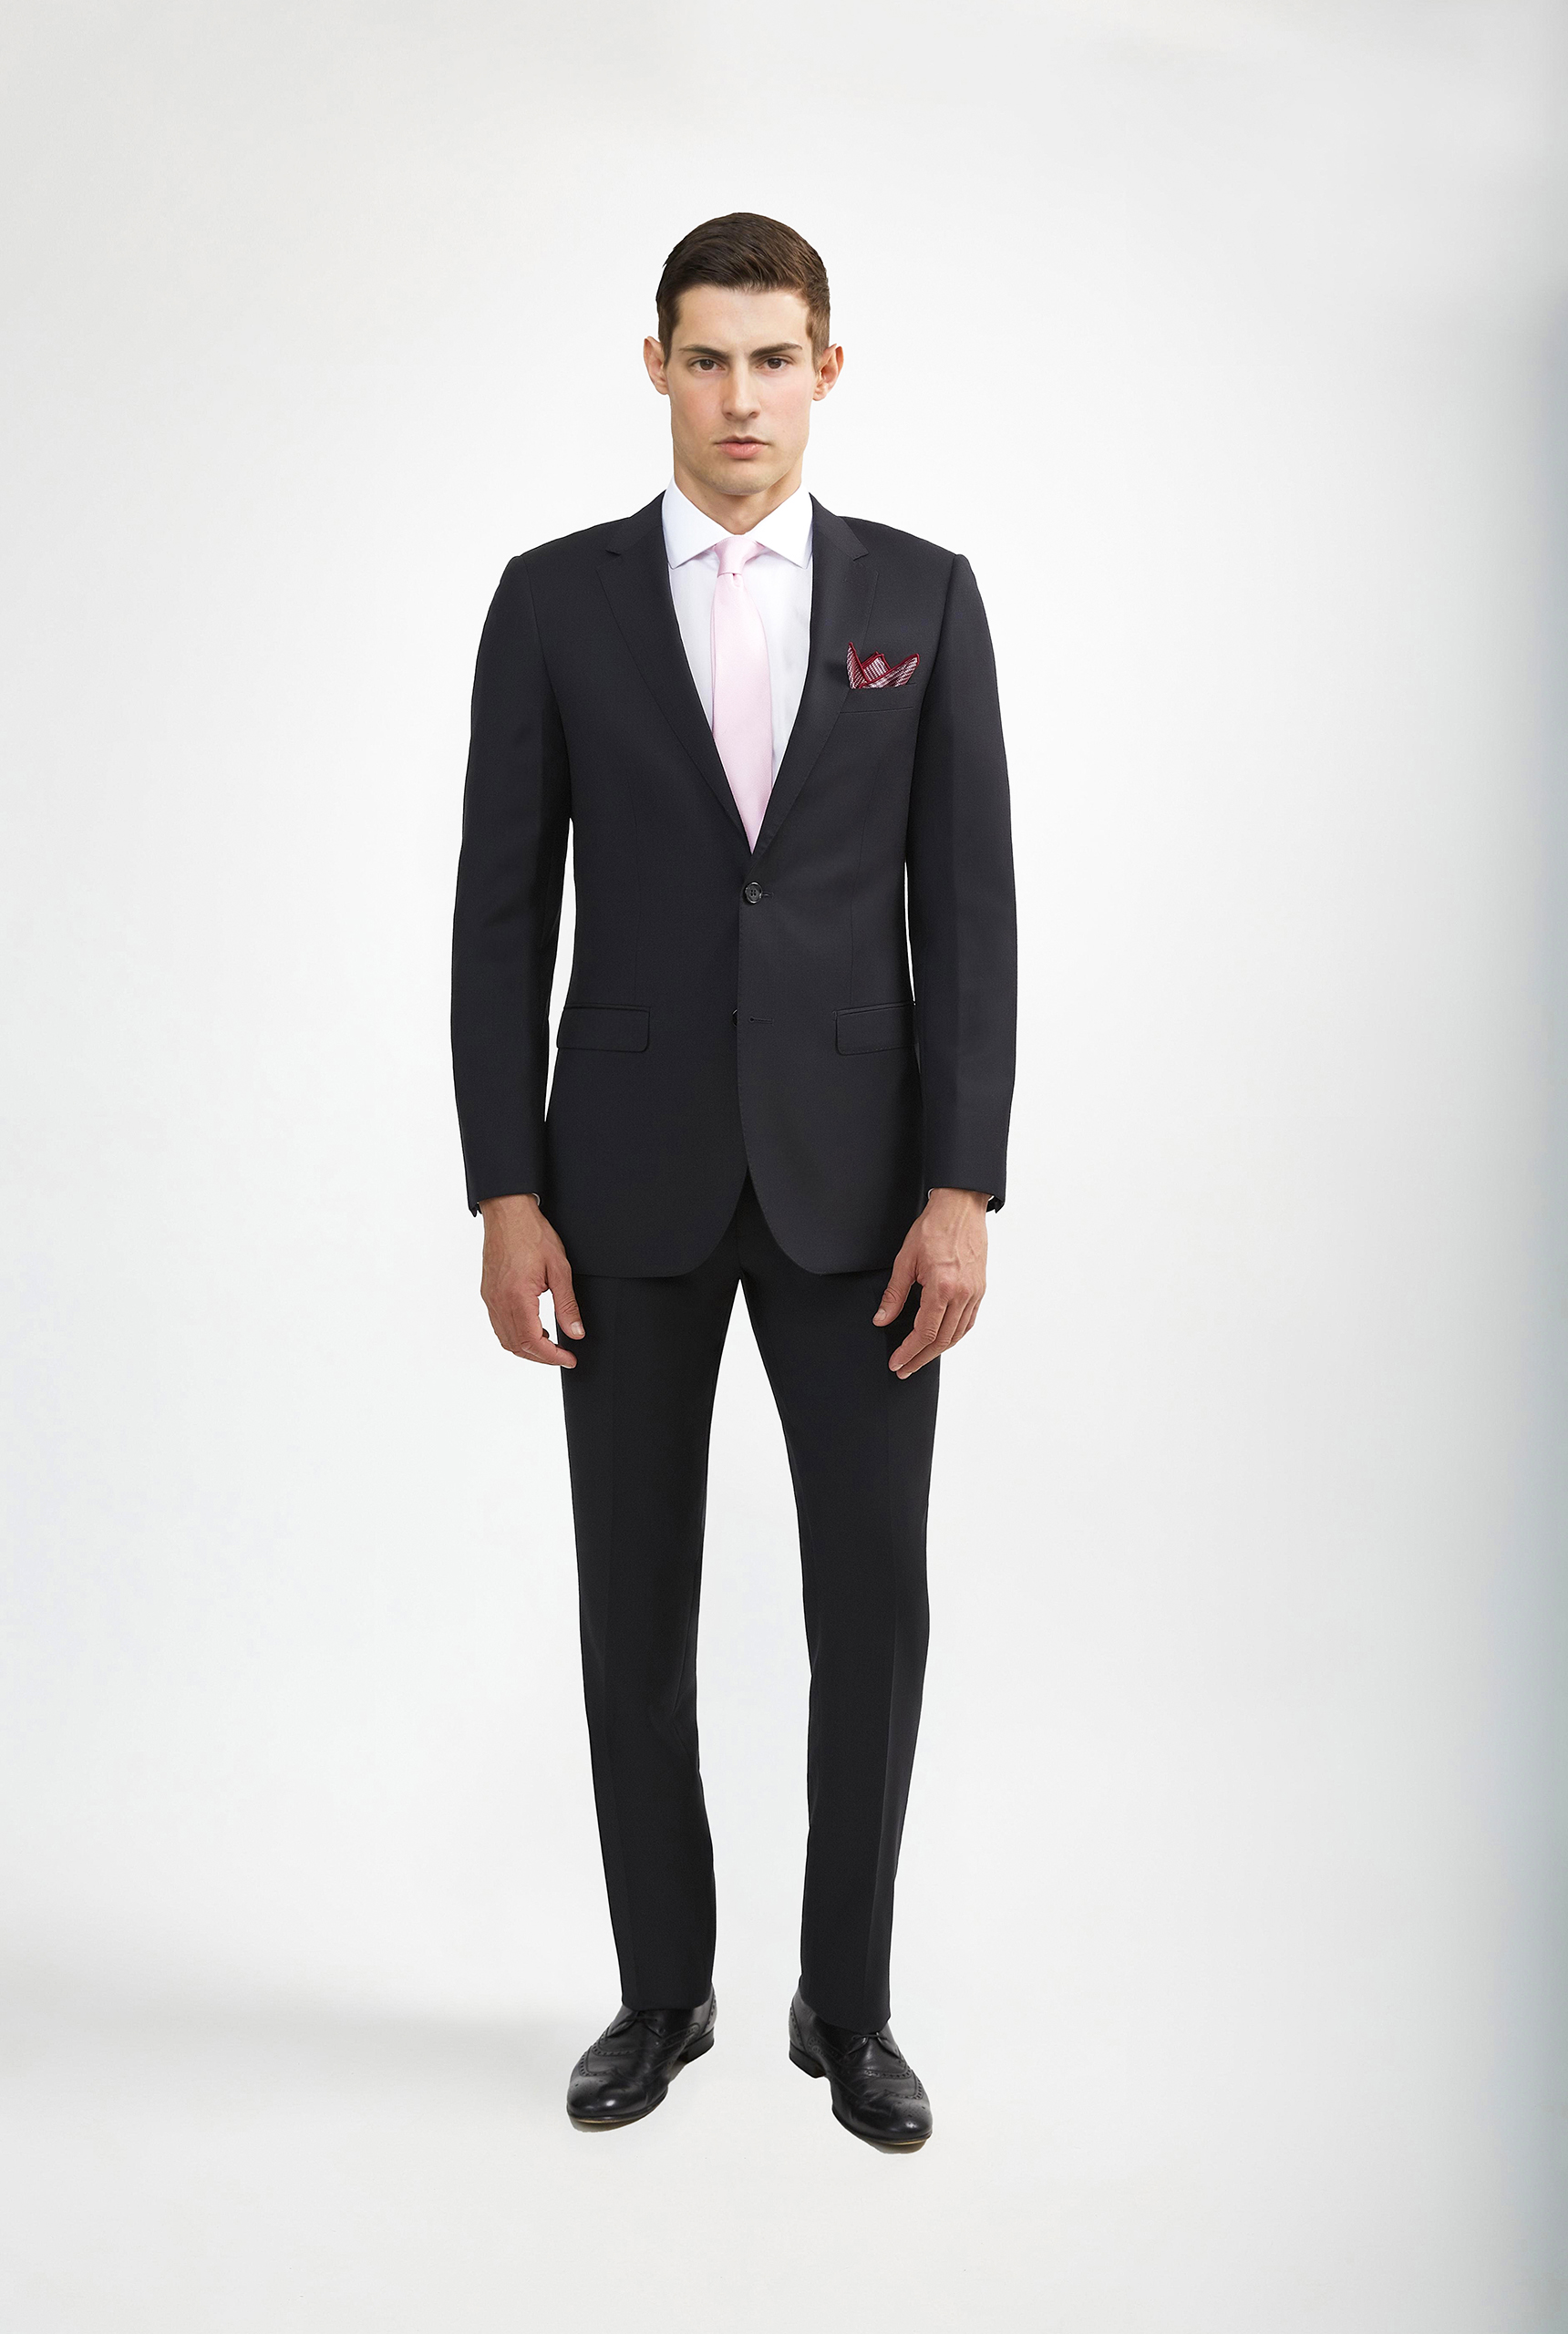 Guide on How to Wear a Tuxedo (Outfit Ideas) – NYC Tuxedos